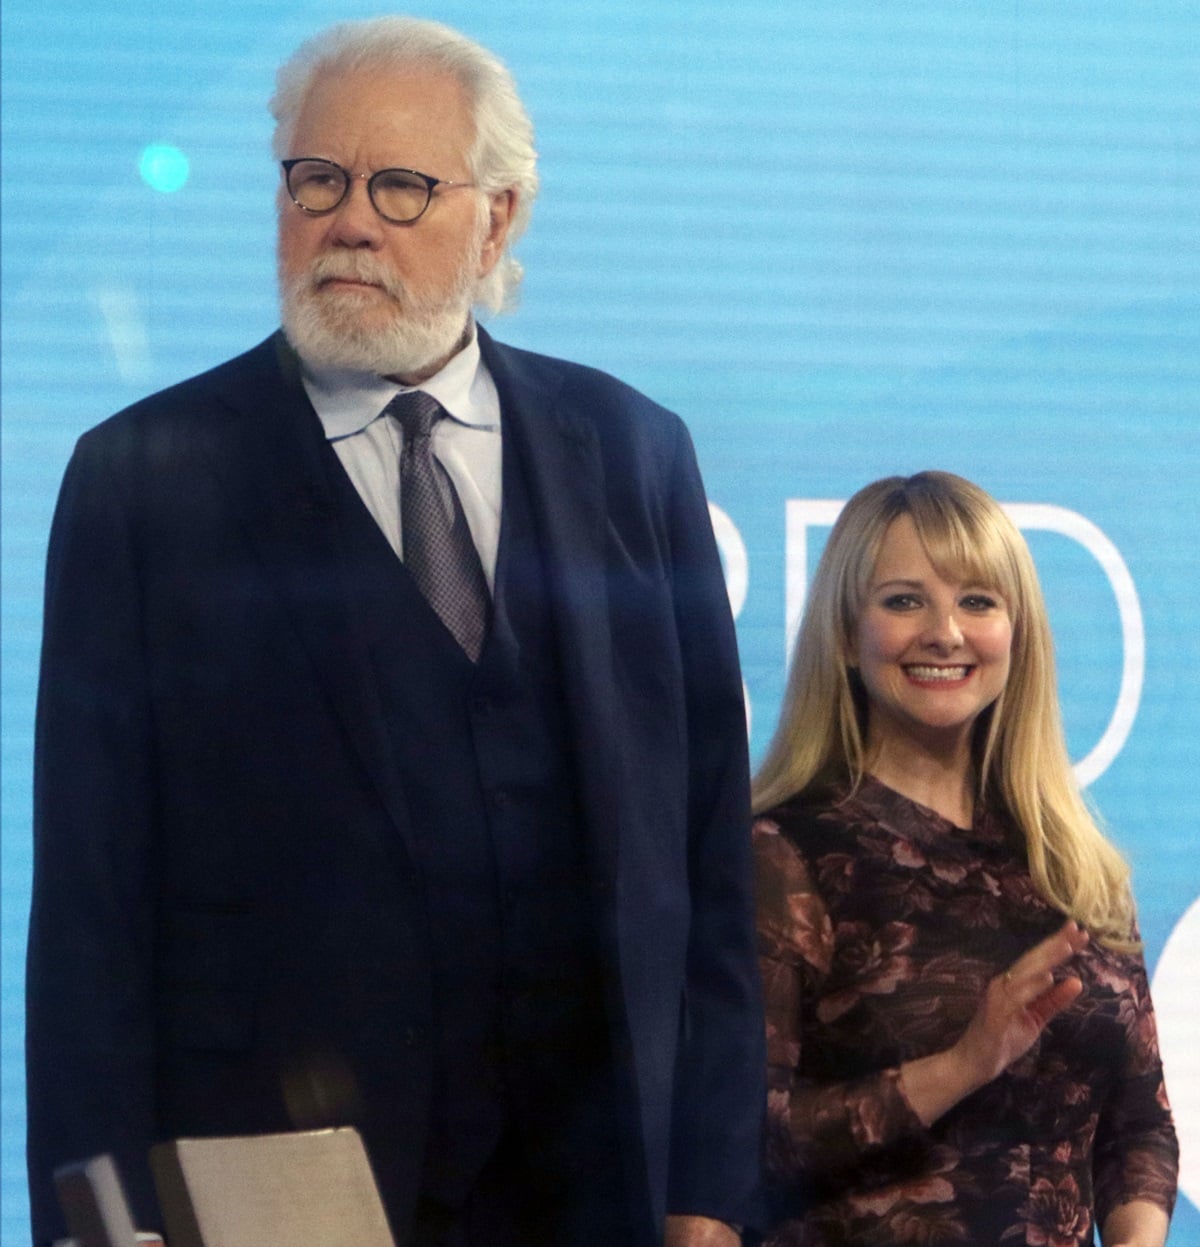 John Larroquette reprises his role from the original run of the series as Dan Fielding and Melissa Rauch portrays Abby Stone, the daughter of the late Harry Stone, in the revival of the American sitcom Night Court